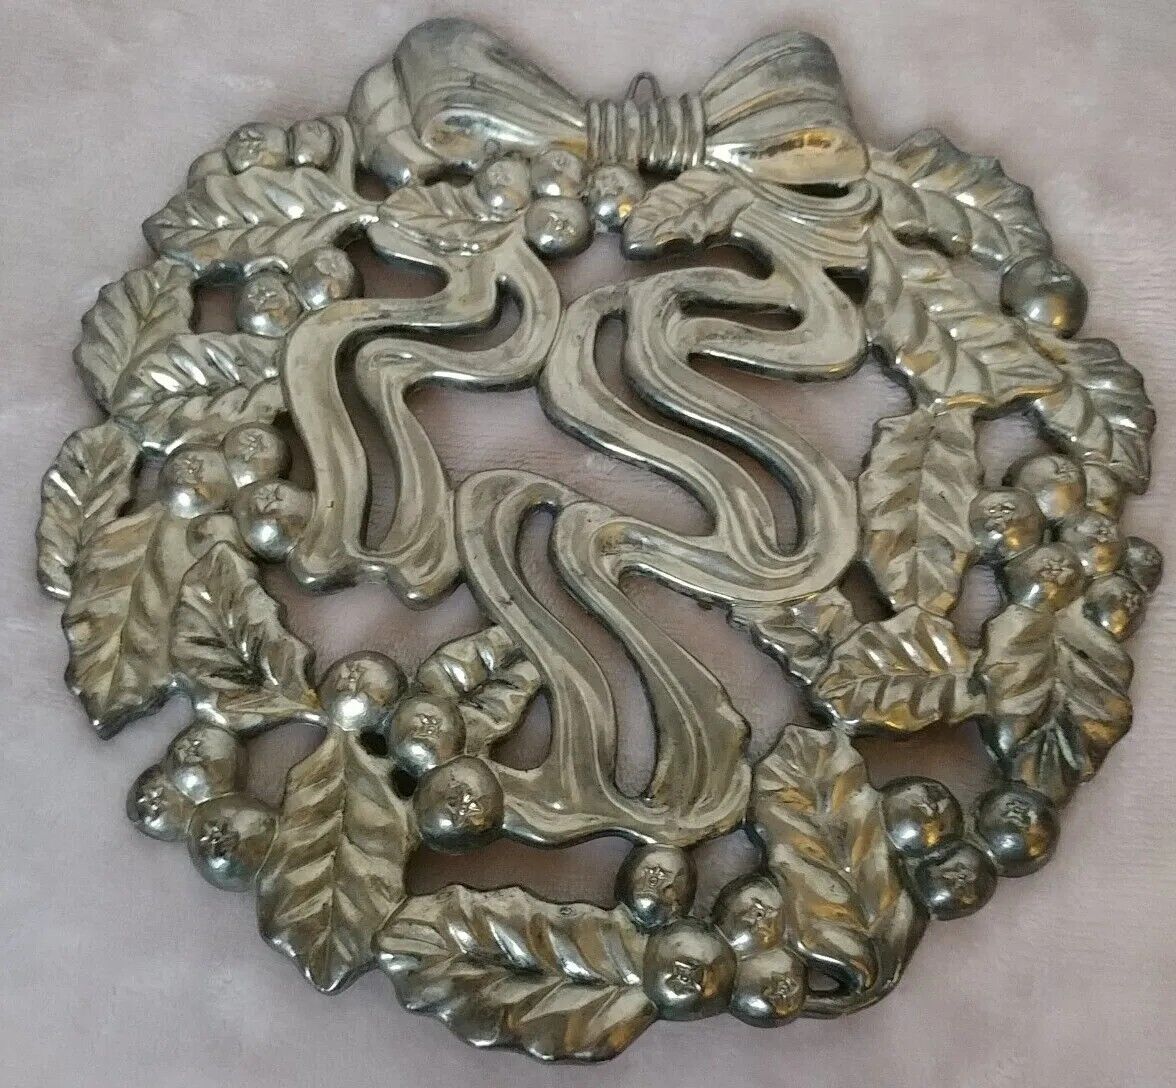 Vintage Trivet Christmas Holly Wreath  Godinger Silverplated Footed Wall Hanging